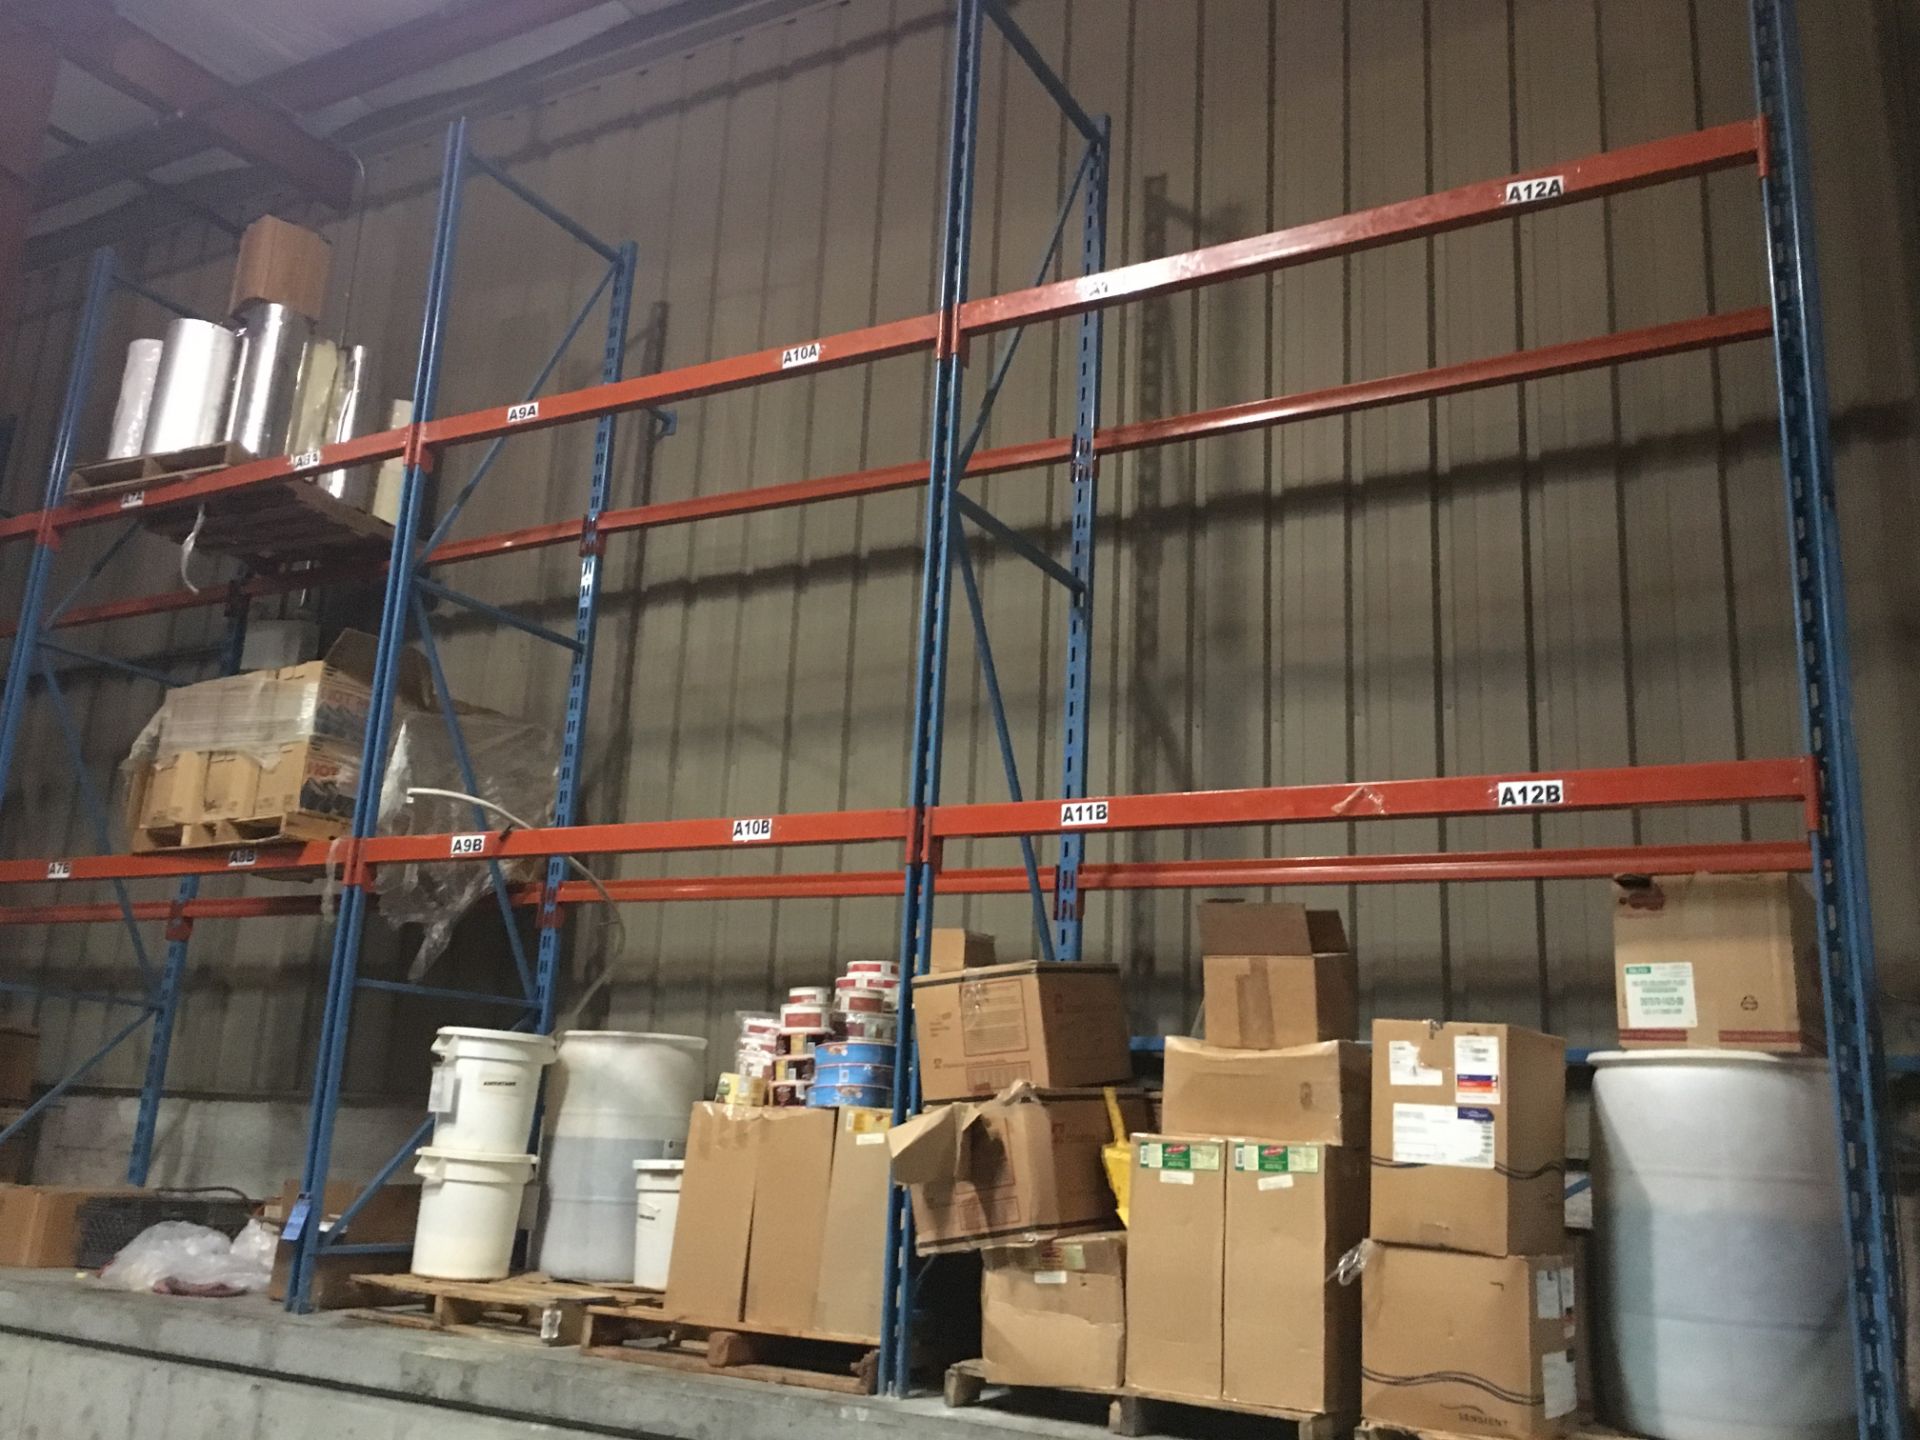 40" X 92" X 15' BLUE AND ORANGE PALLET RACK, ADJUSTABLE BEAMS, 6-SECTIONS, 1-RUN **NO CONTENT**